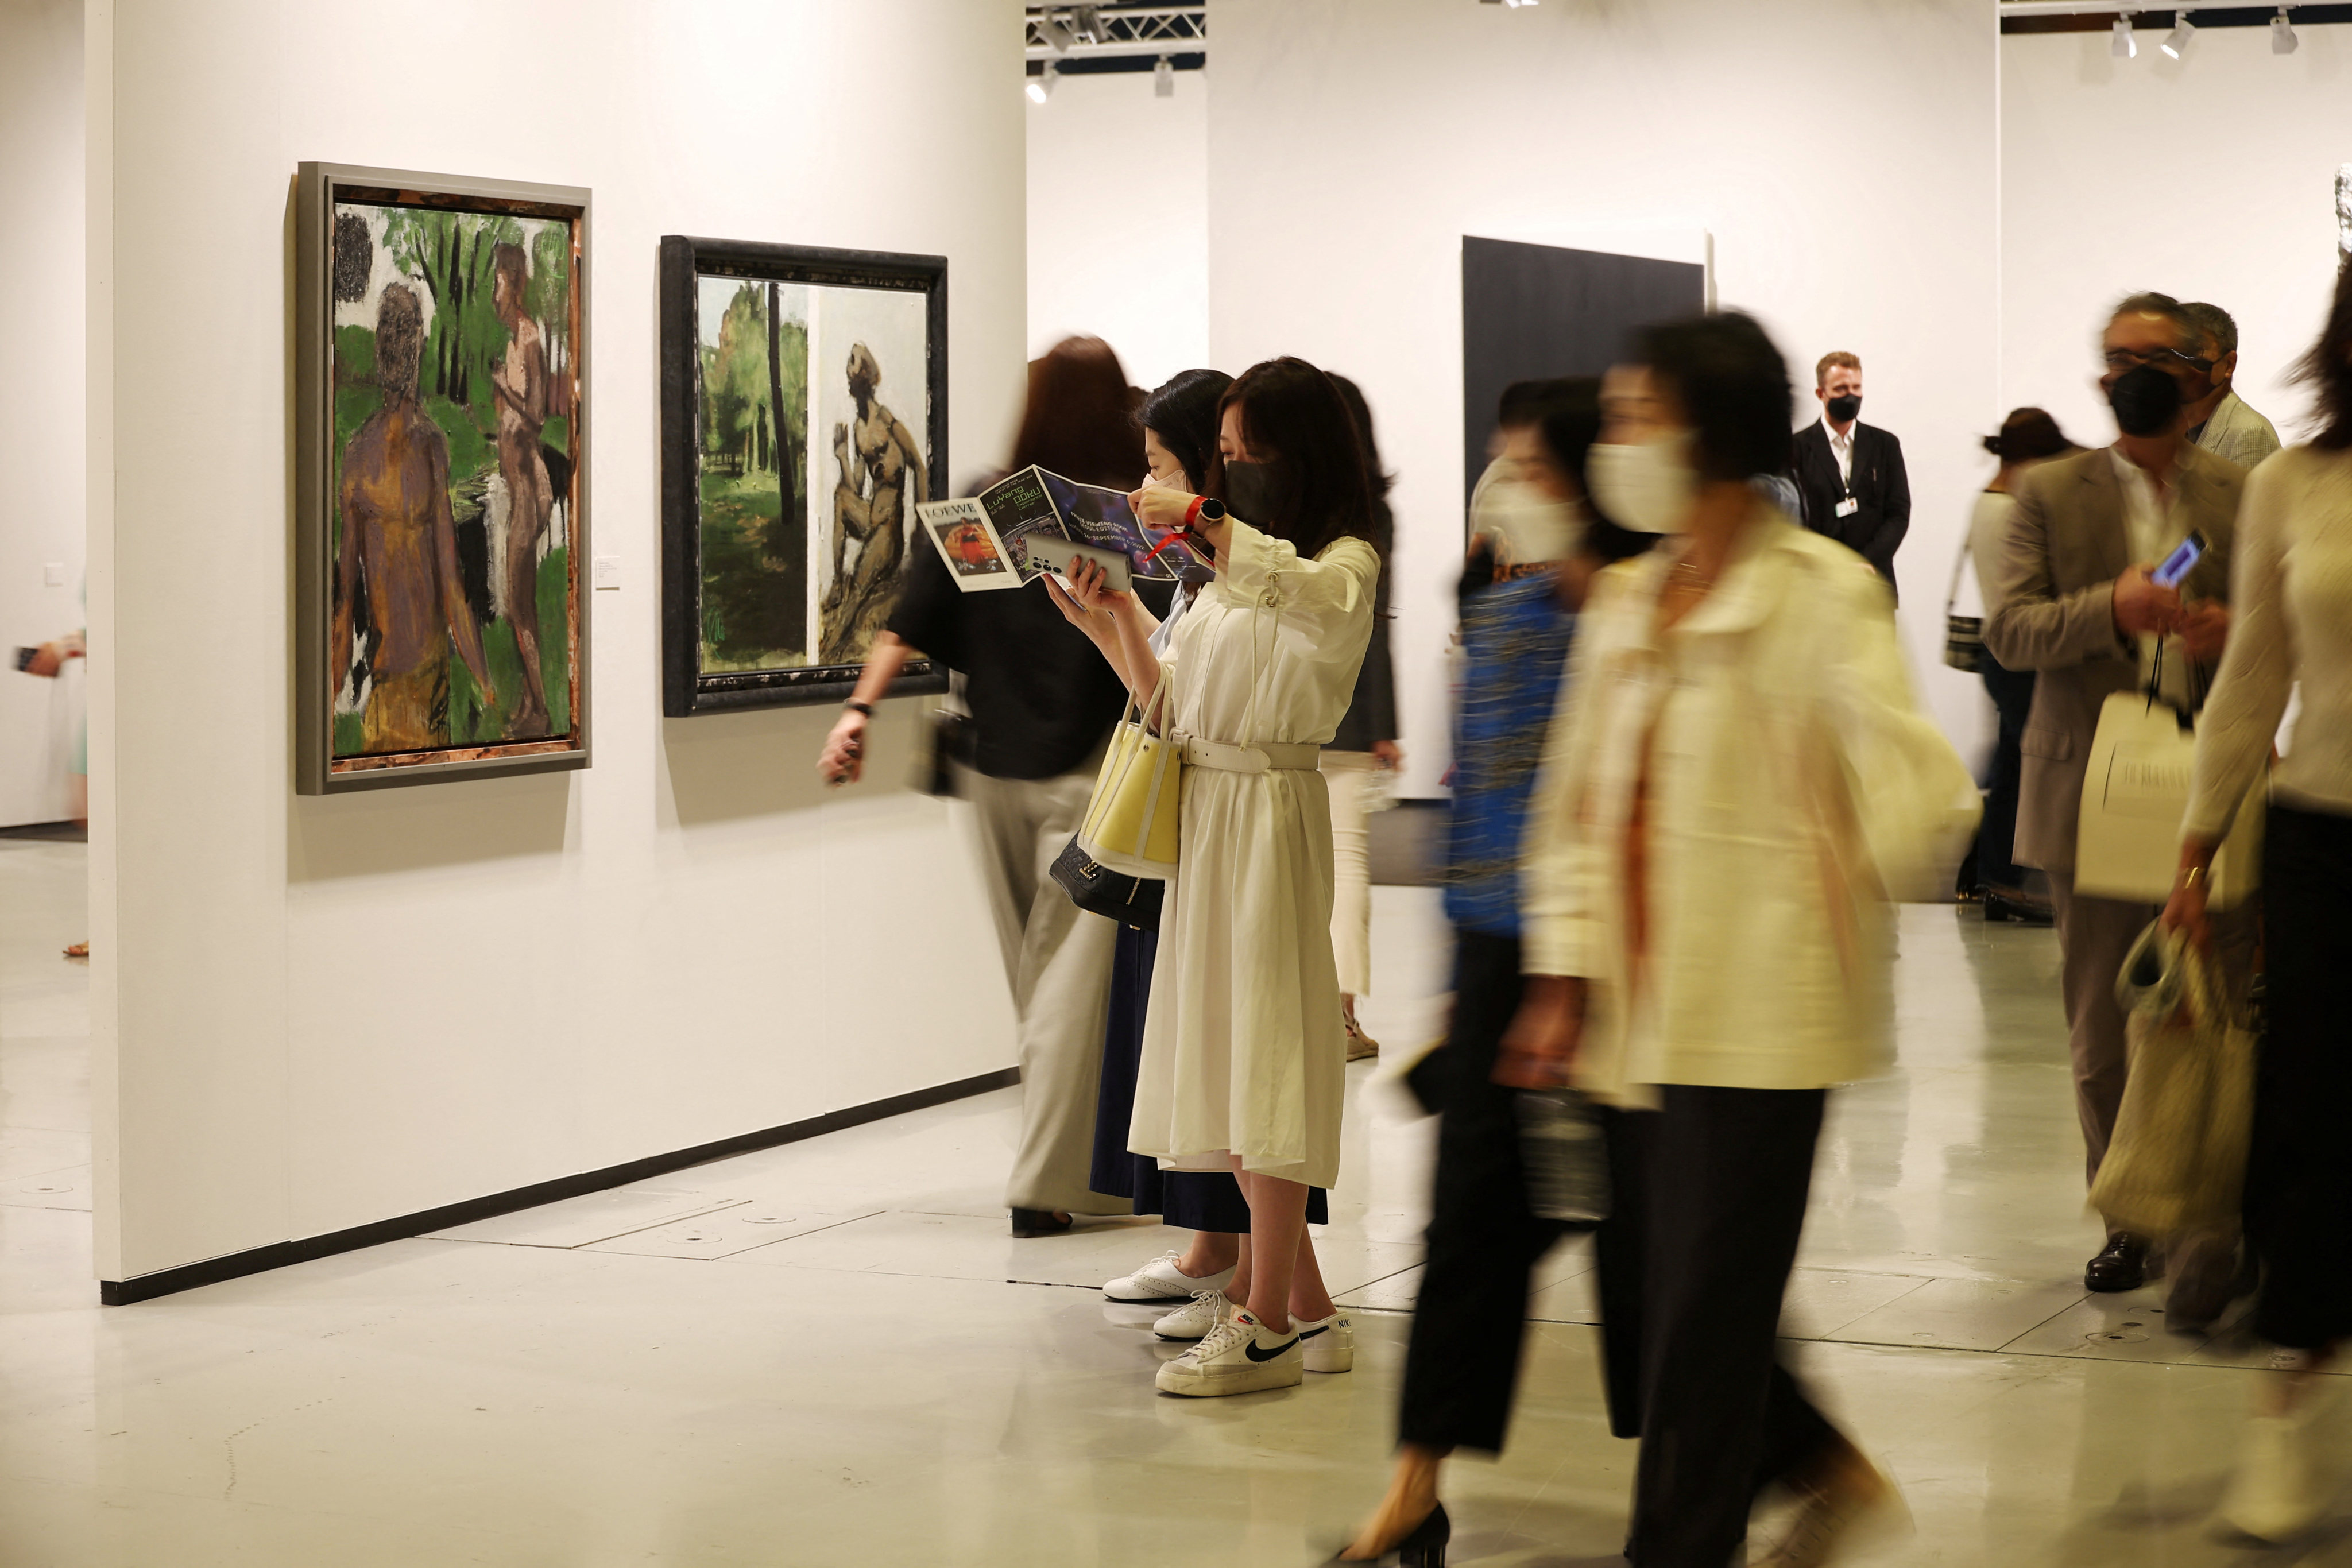 VIP visitors at the preview of the Frieze art fair in Seoul, South Korea. The event marks the Asian debut of Frieze, the UK-based art fair organiser. Photo: Reuters